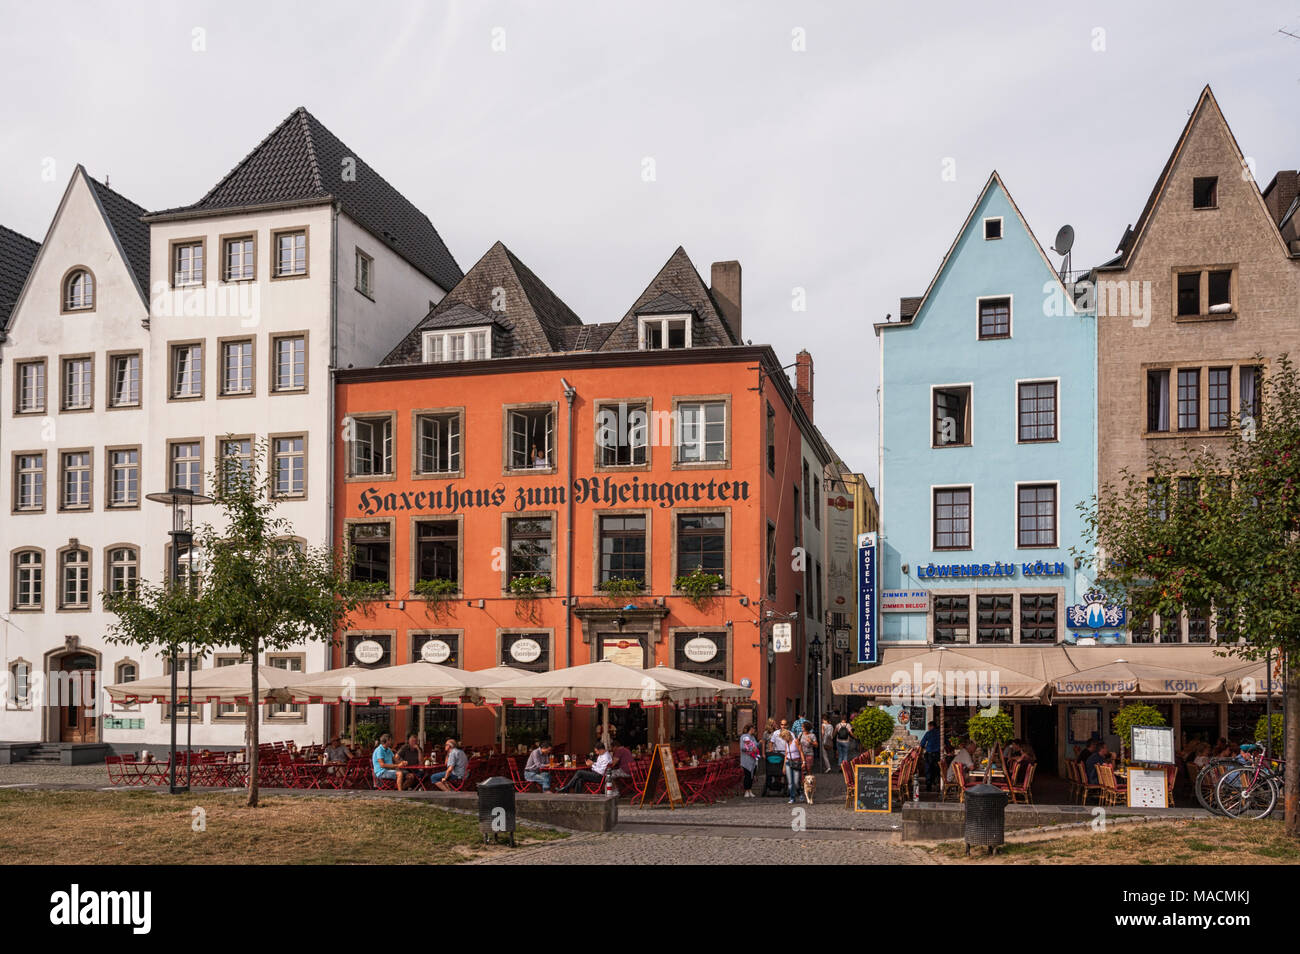 https://c8.alamy.com/comp/MACMKJ/cologne-italy-september-11-2016-unidentified-people-and-details-of-the-old-and-beautiful-town-of-cologne-germany-MACMKJ.jpg